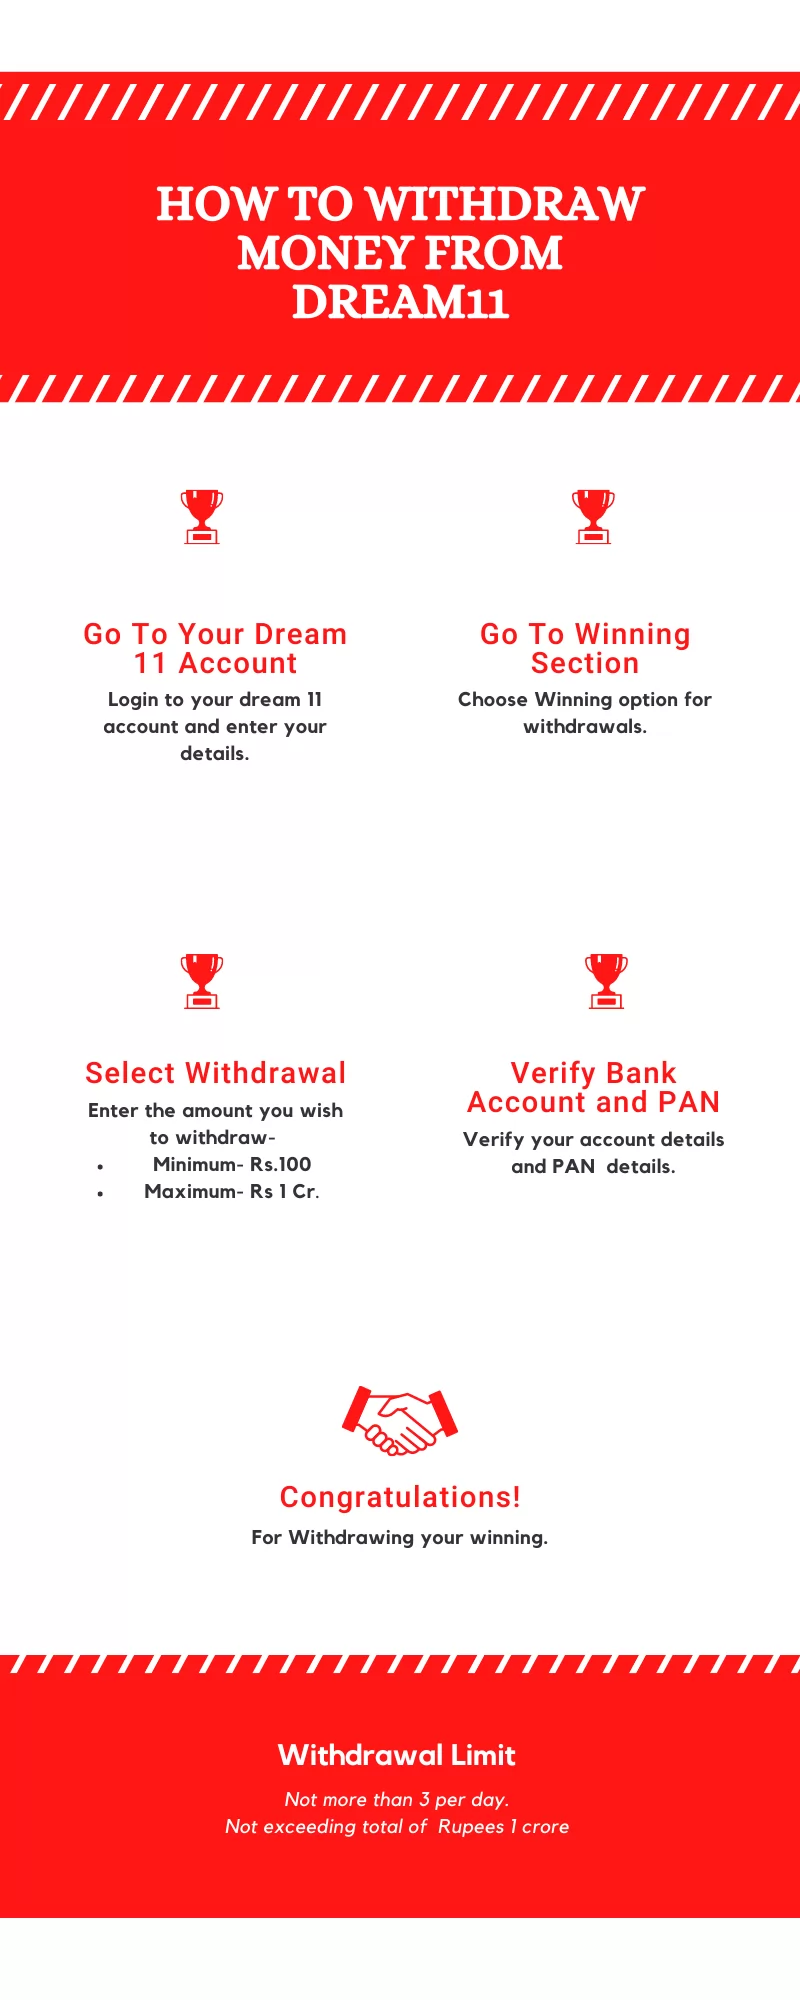 How to Withdraw Dream11 Winning